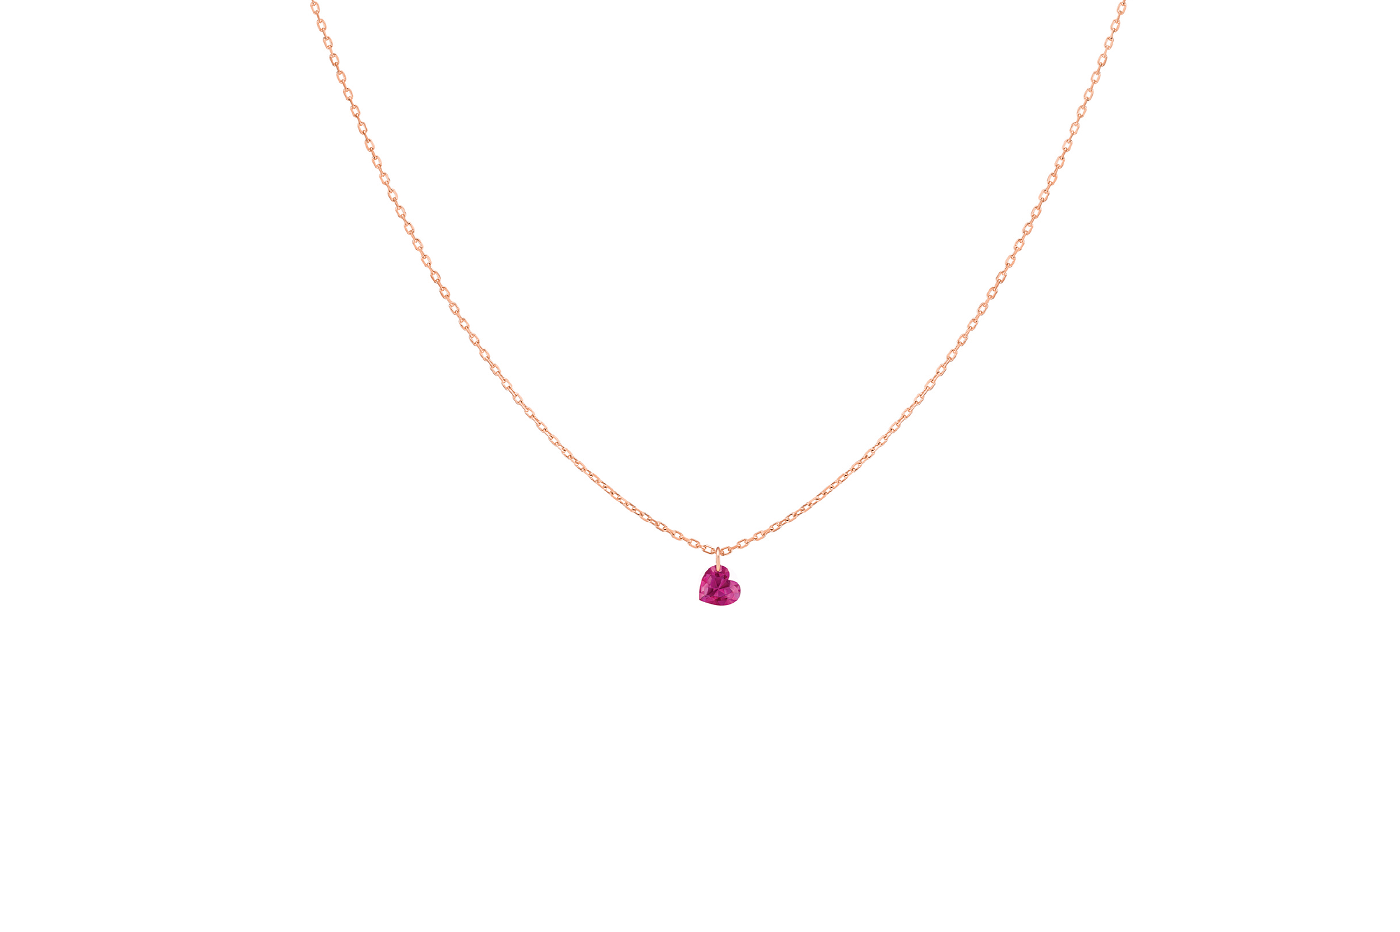 Collier CONFETTI, rubis cœur, 4mm, 0,30 ct approx., or rose 18KT, 1 gr.